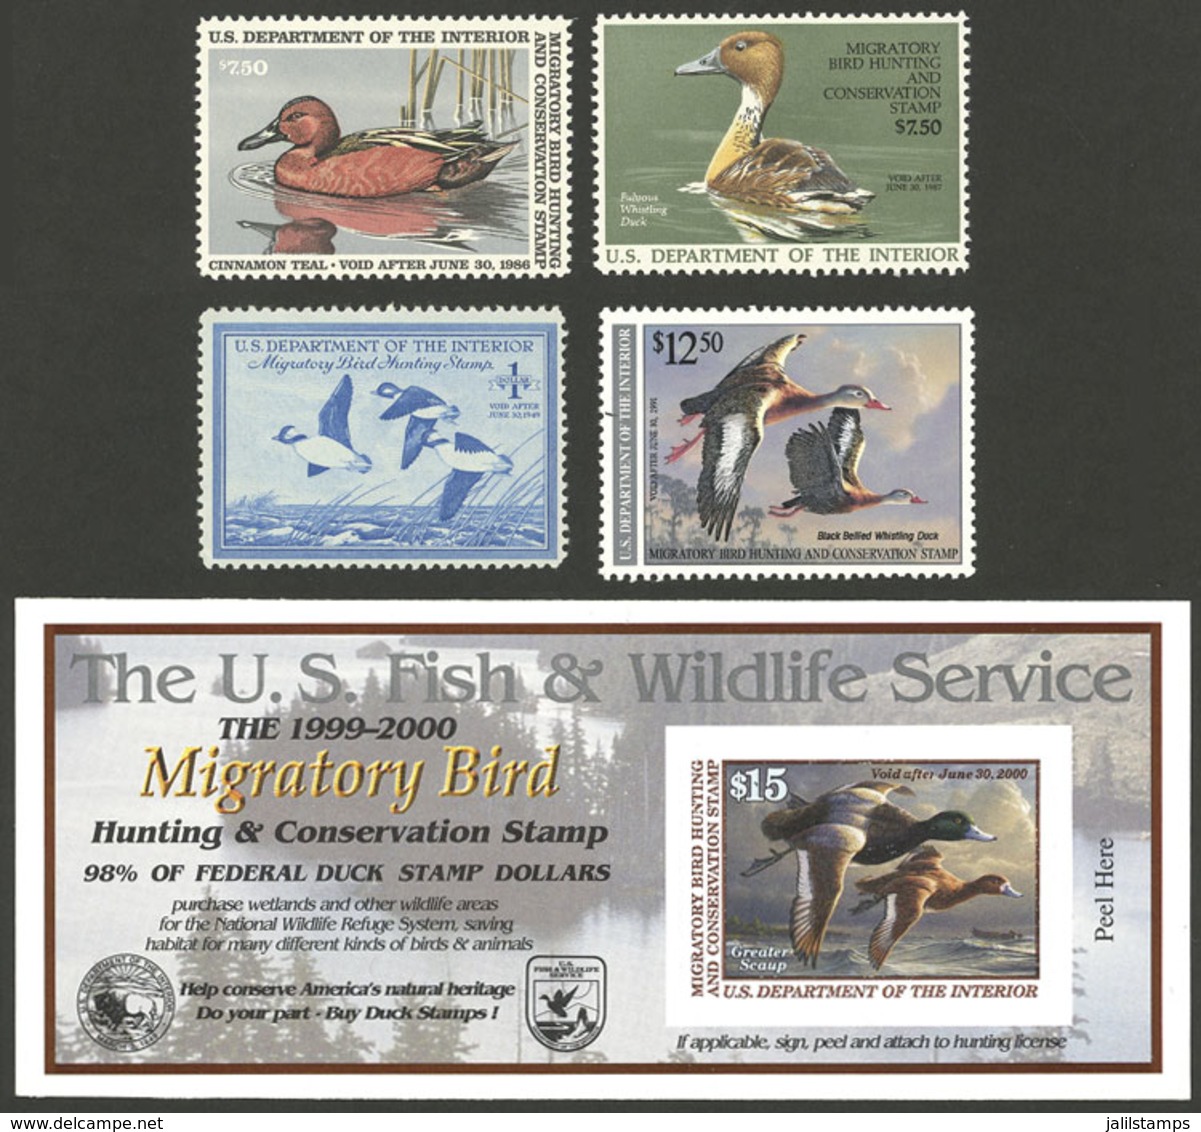 UNITED STATES: HUNTING PERMIT STAMPS: 4 Revenue Stamps + 1 Sheet, All MNH And Of Excellent Quality! - Fiscal